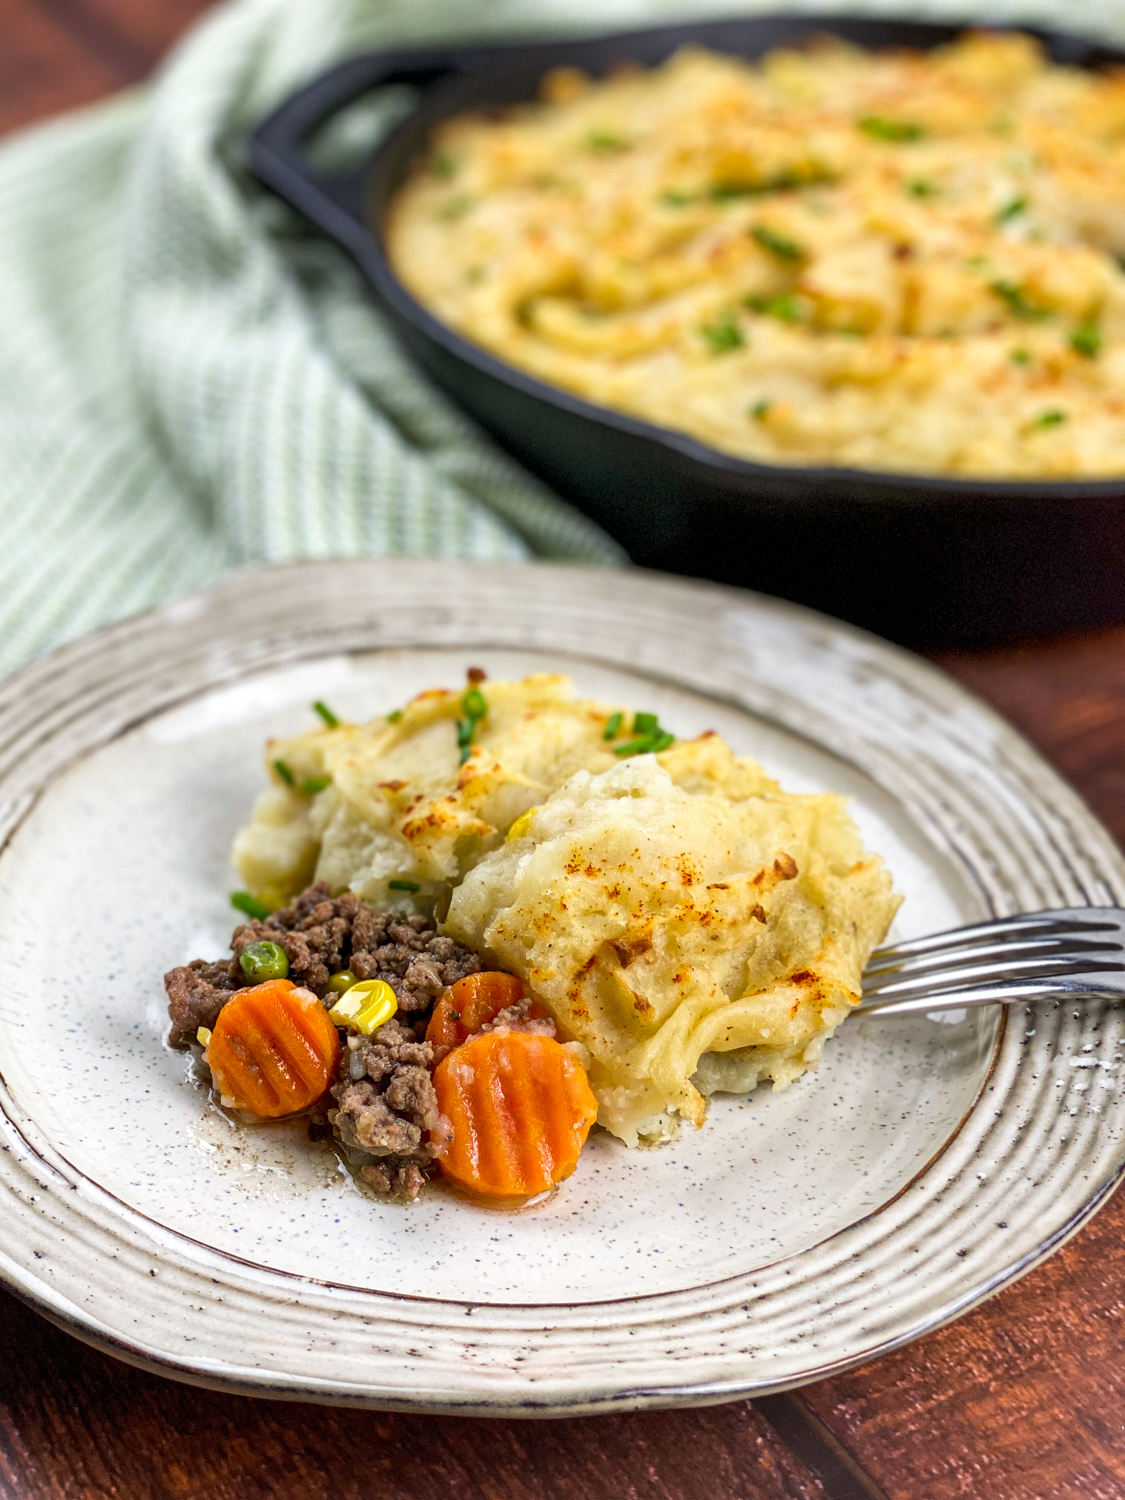 This recipe for cast iron skillet shepherd’s pie makes a hearty, comforting meal that is also perfect for sharing with family and friends.